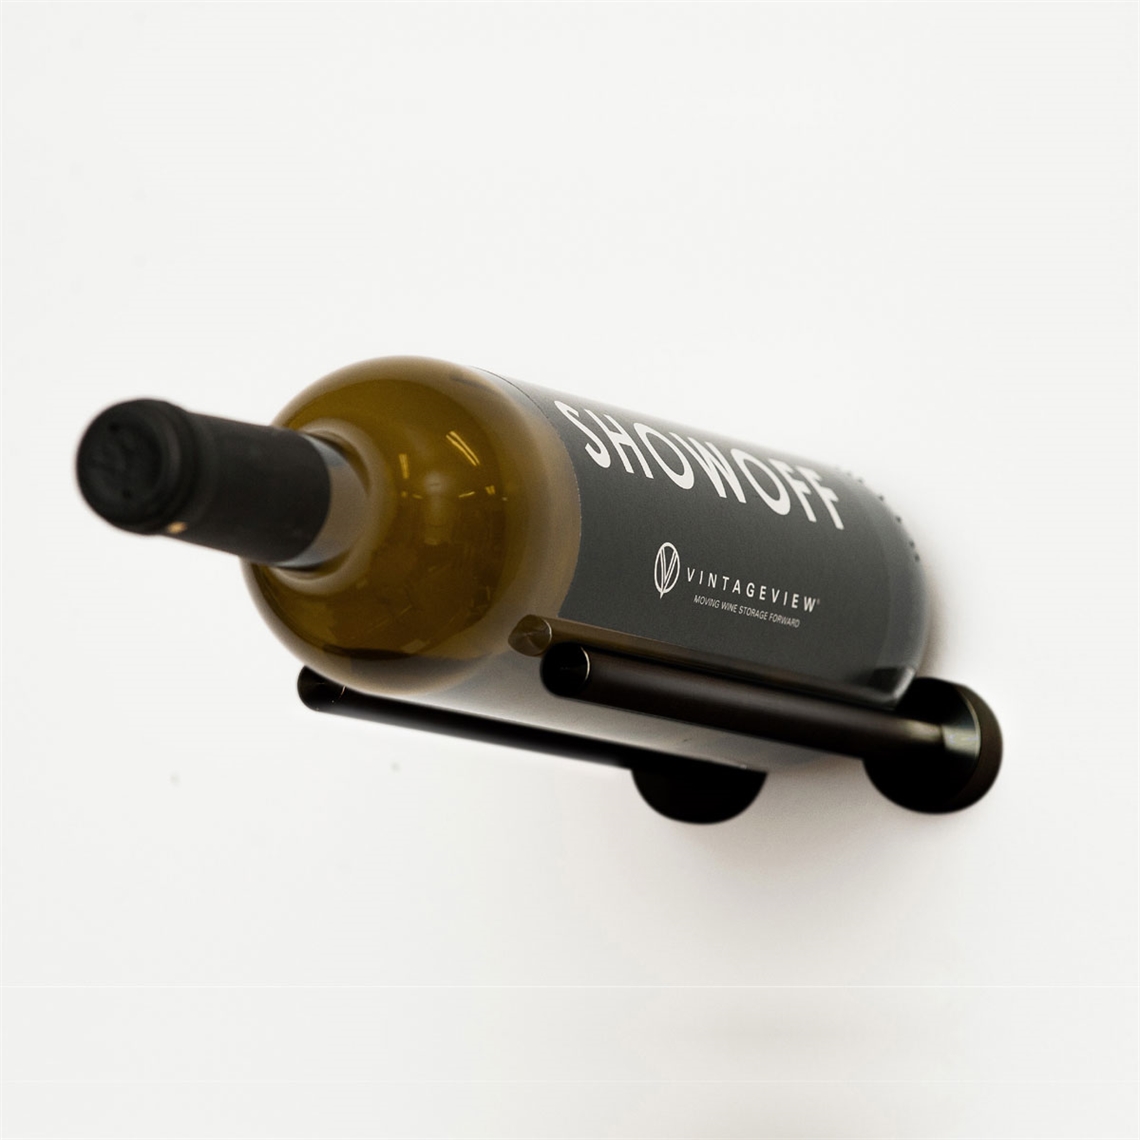 View more flat pack wine rack from our Wall Mounted Wine Racks range